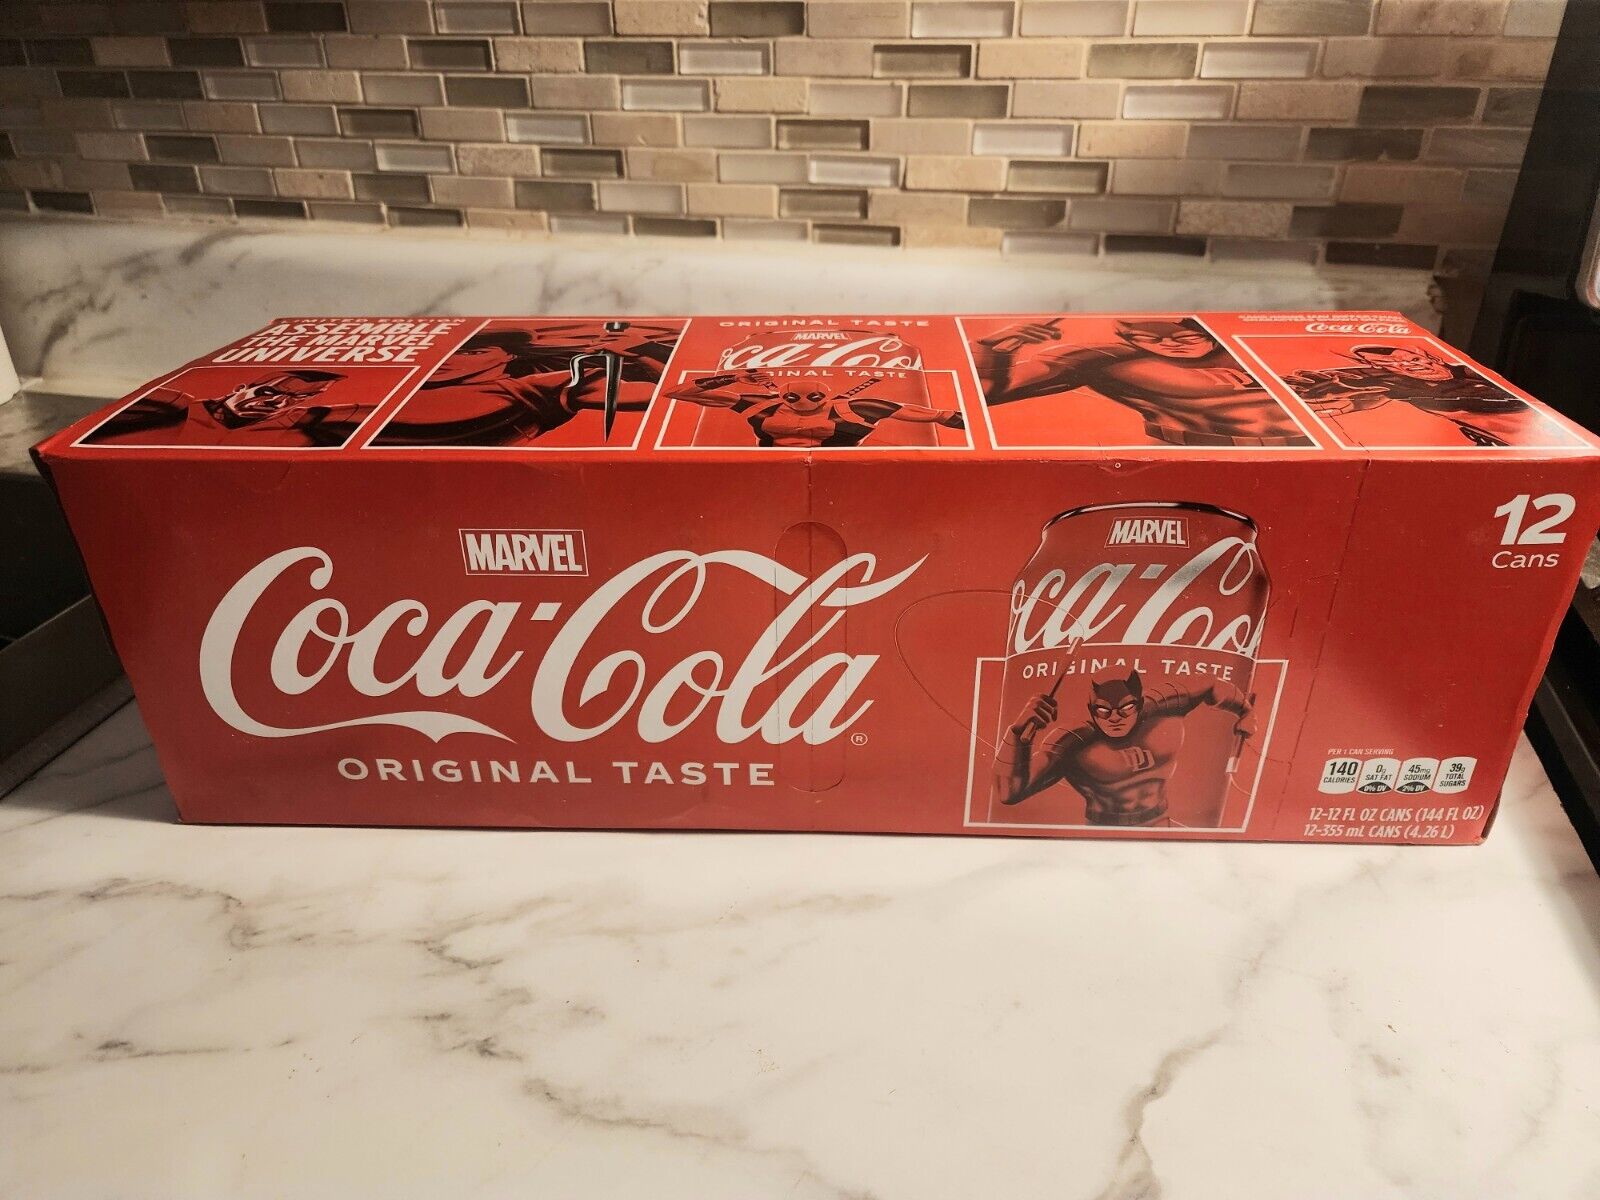 Marvel Coca Cola Sealed 12 Pack of 12 oz Cans Limited Edition